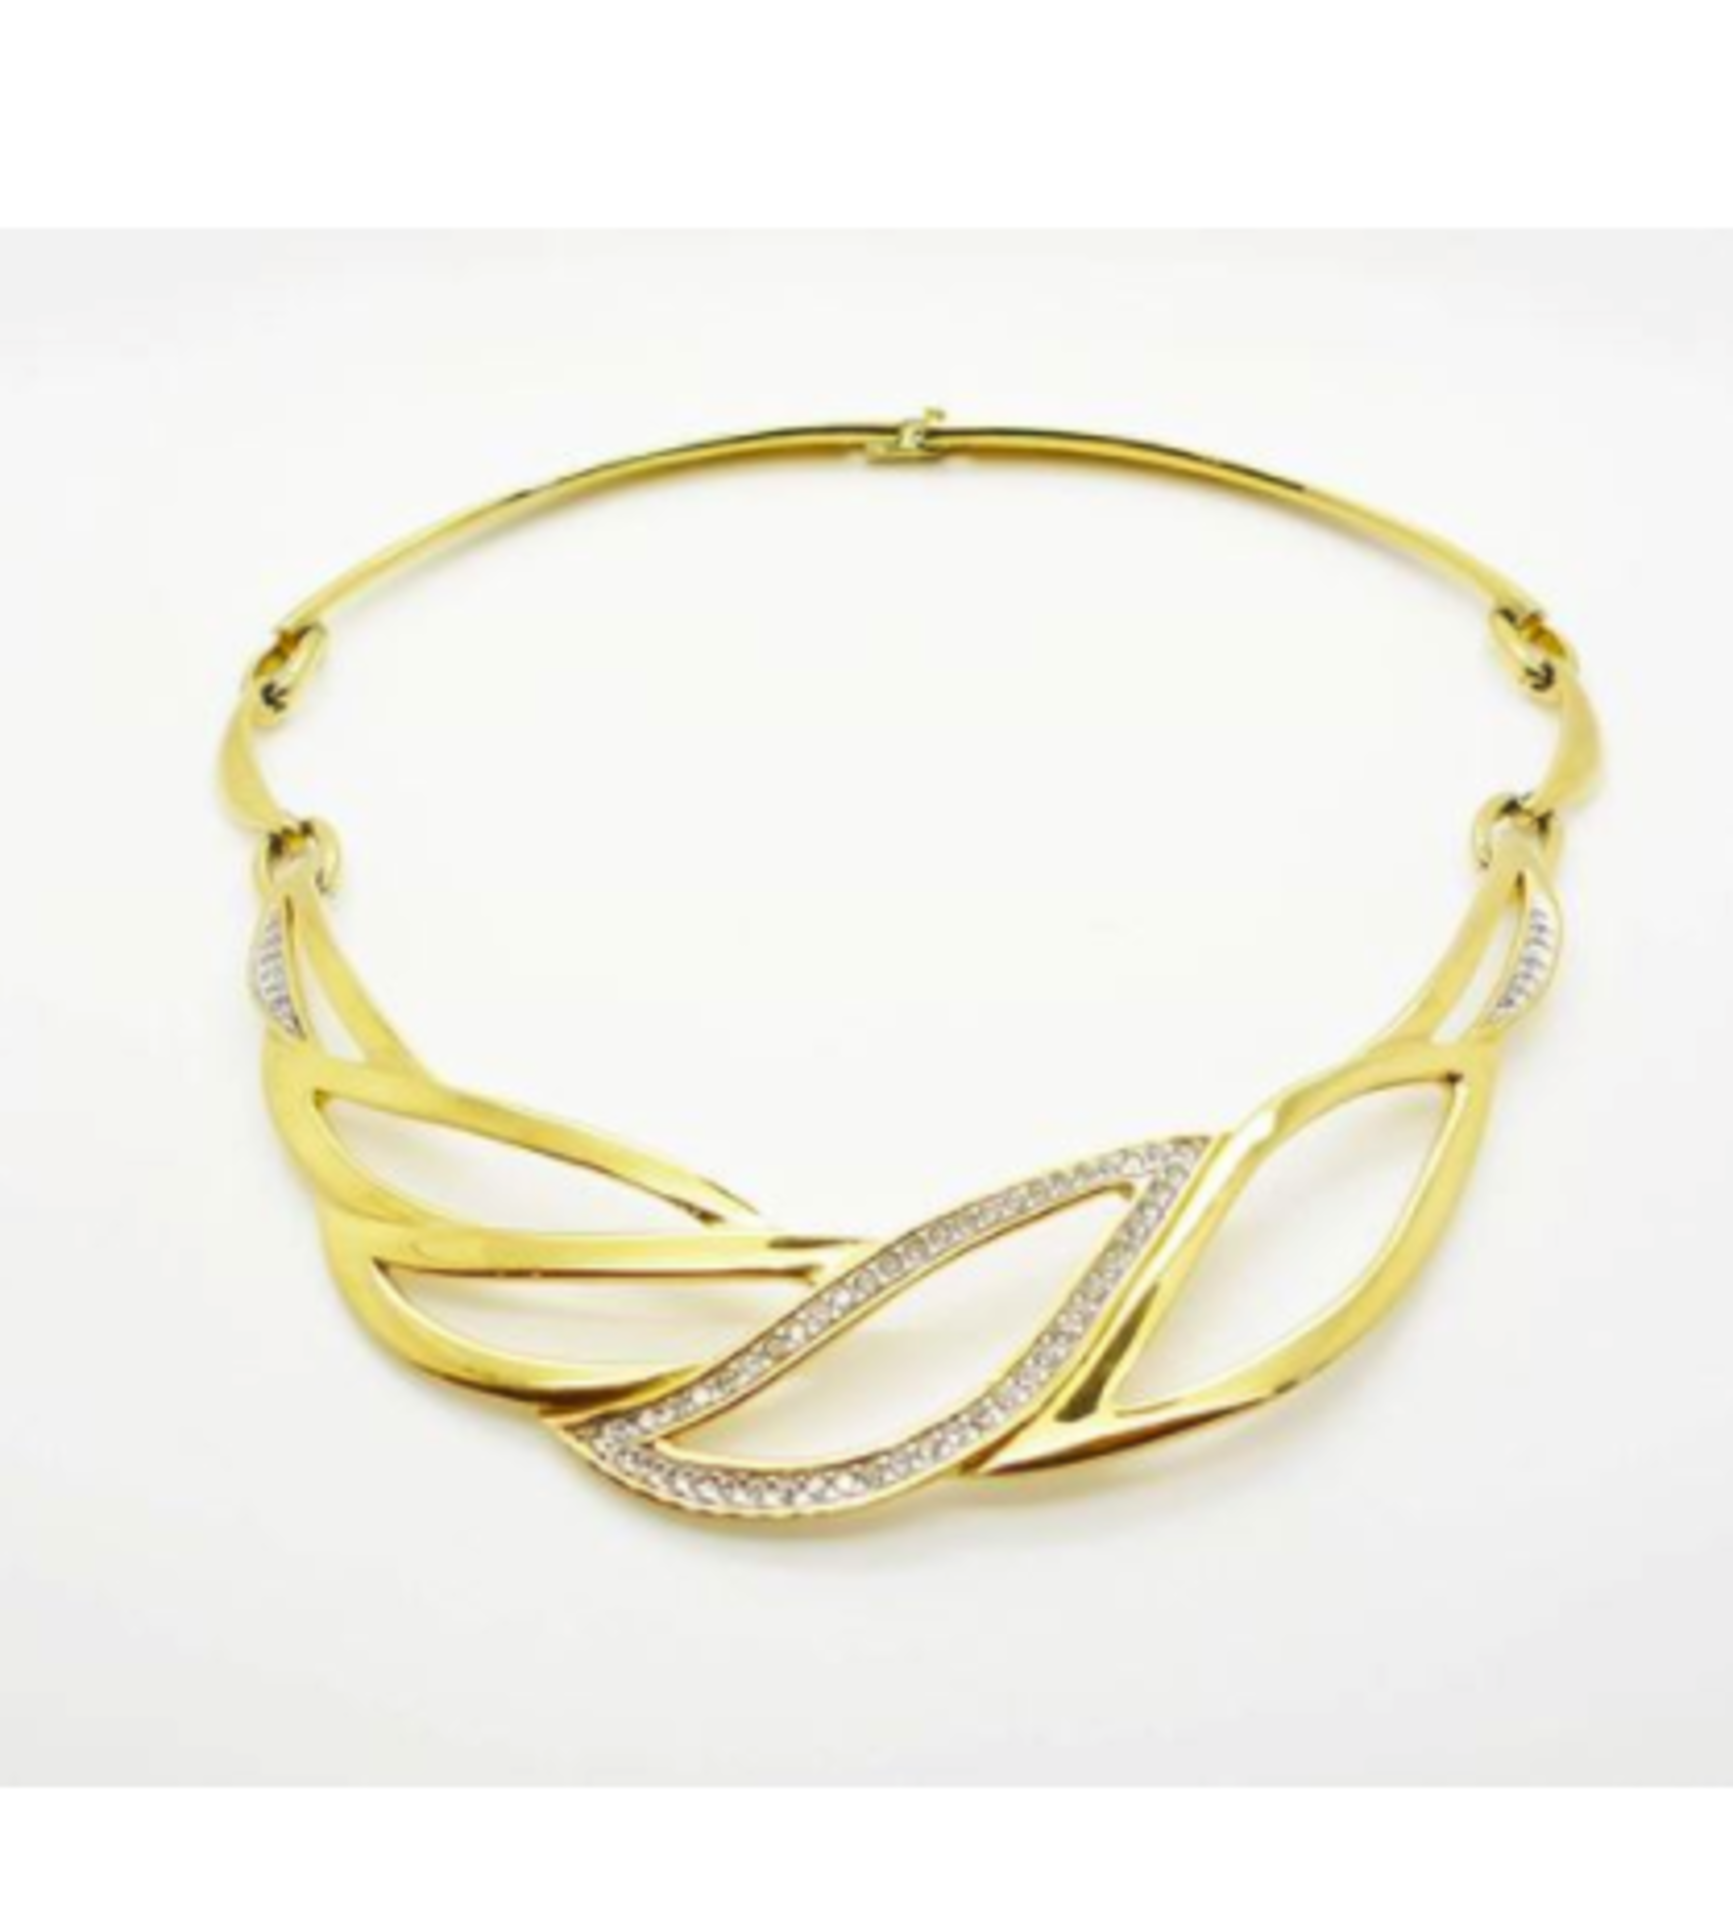 Vintage Monet Gold Tone And Diamante Choker - Image 3 of 4